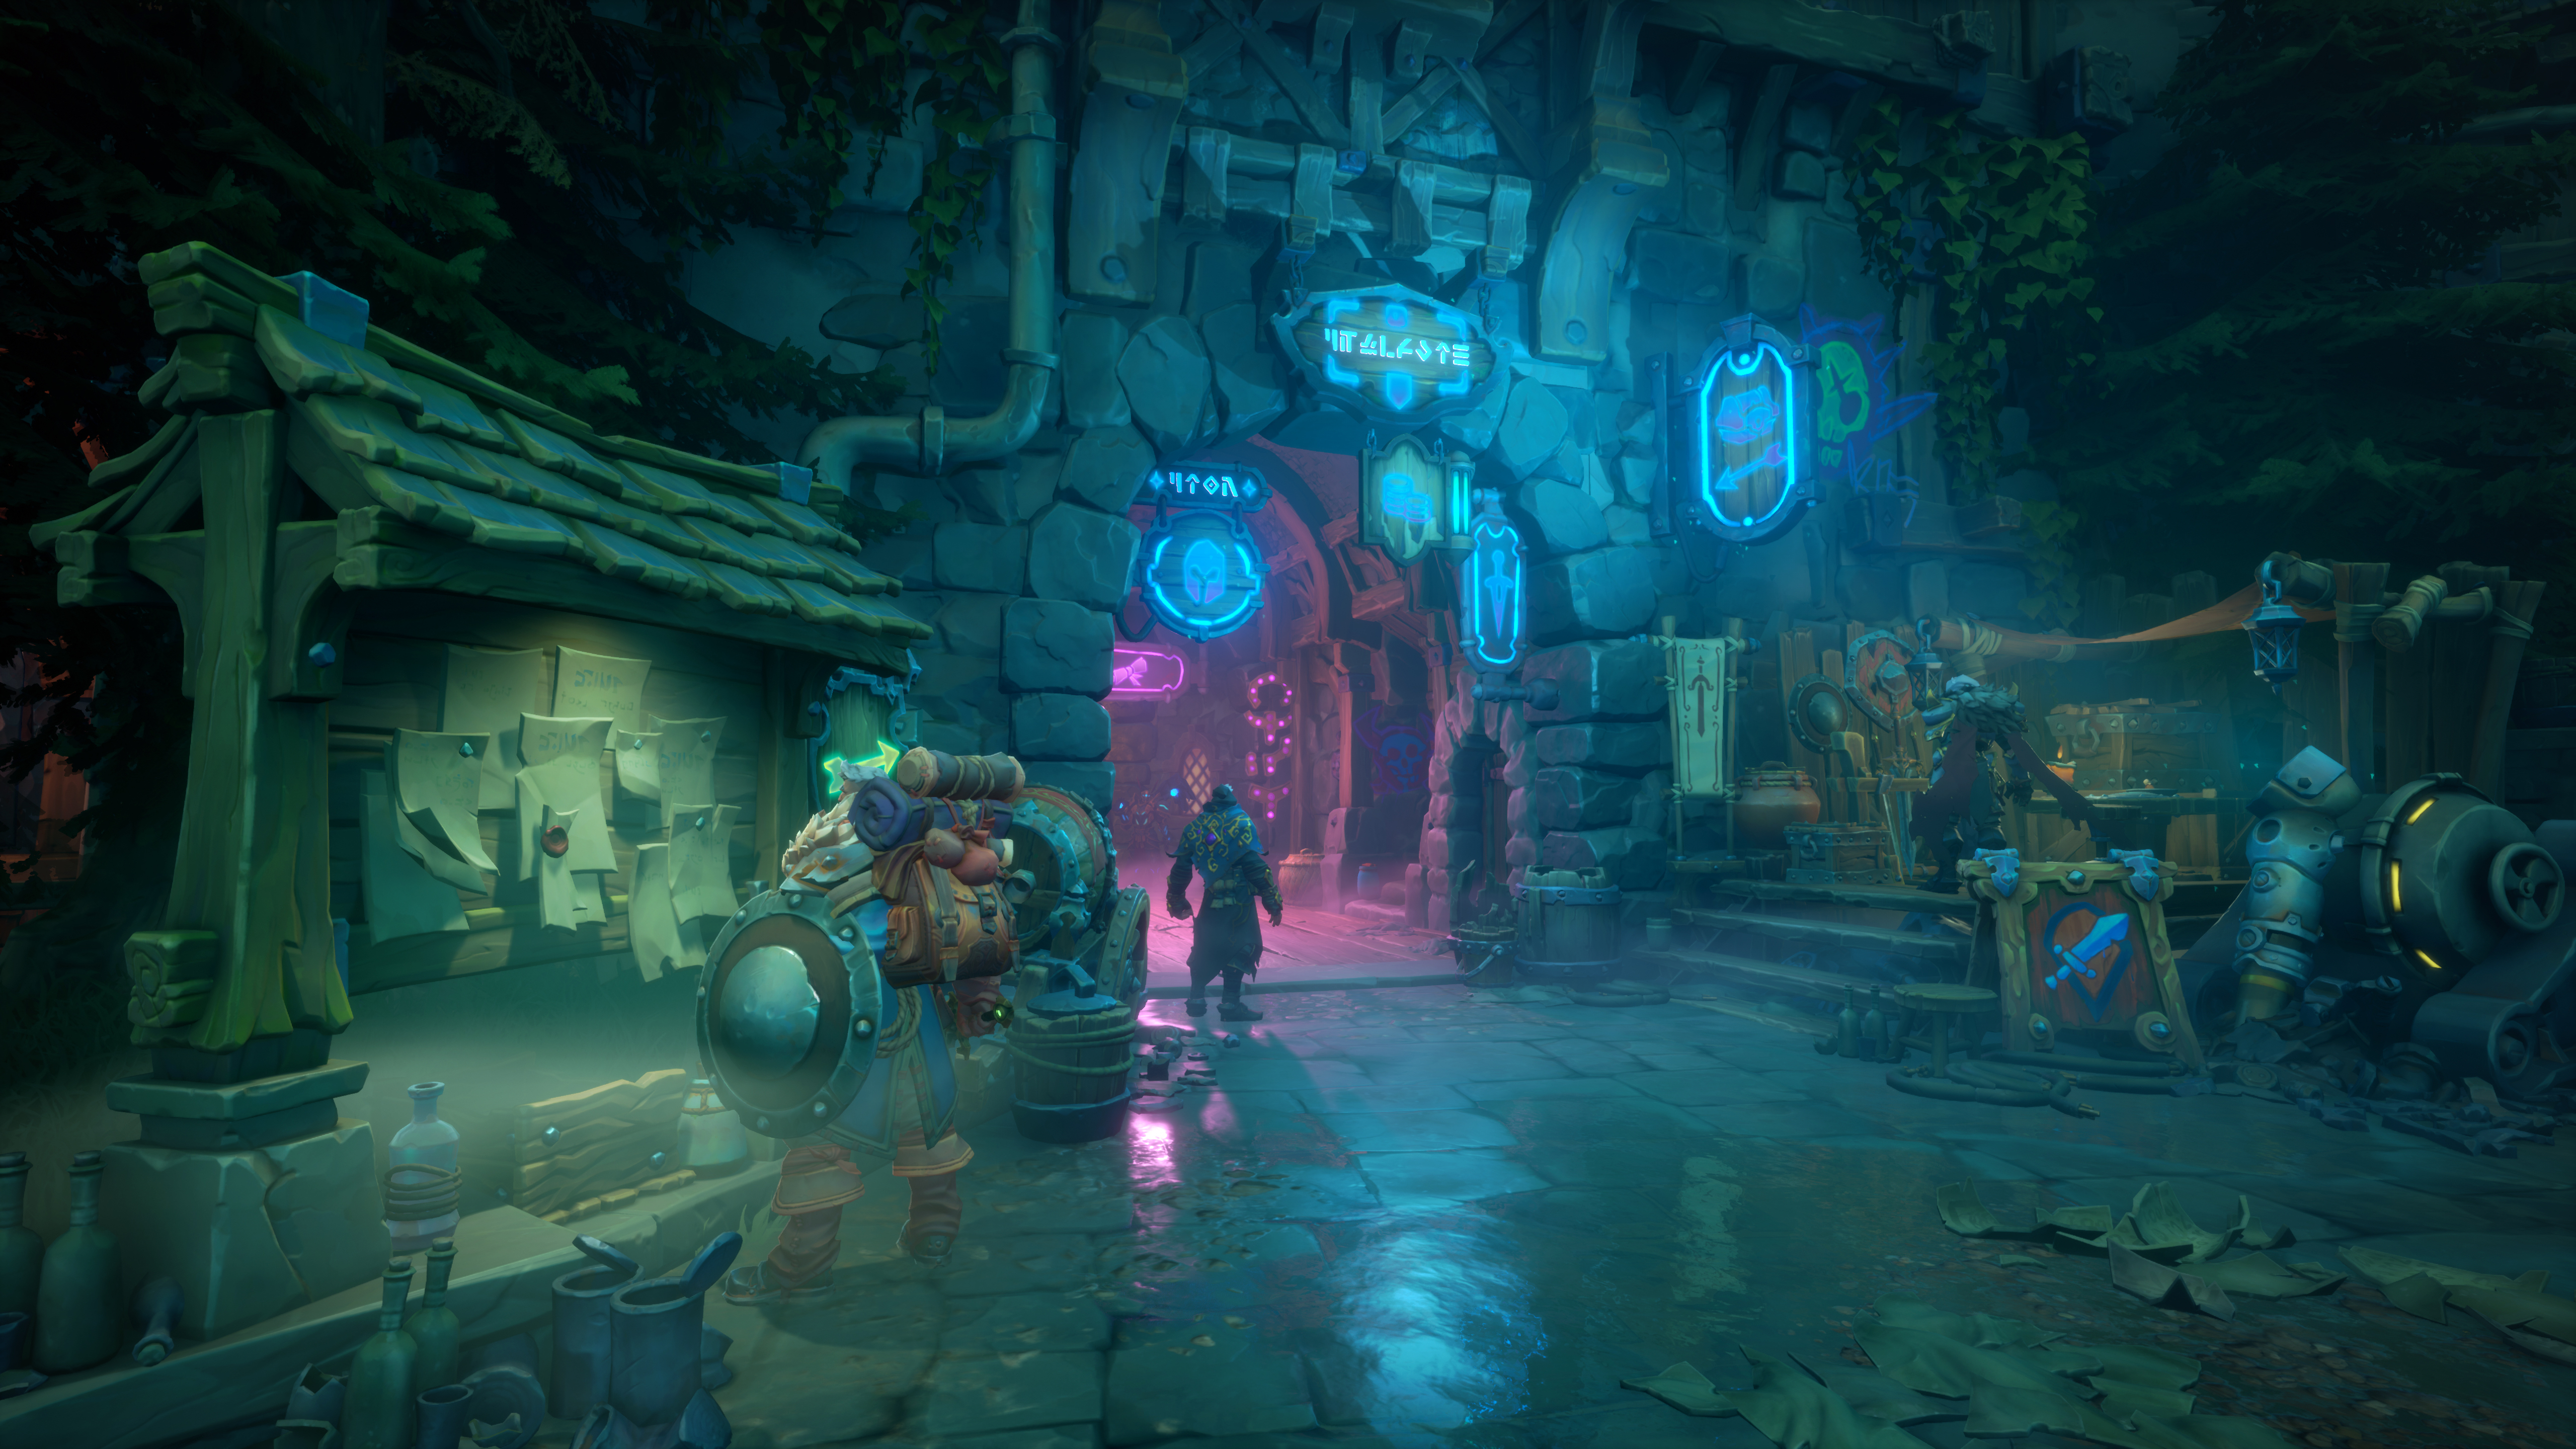 Wayfinder is a new character-driven online RPG – PlayStation.Blog